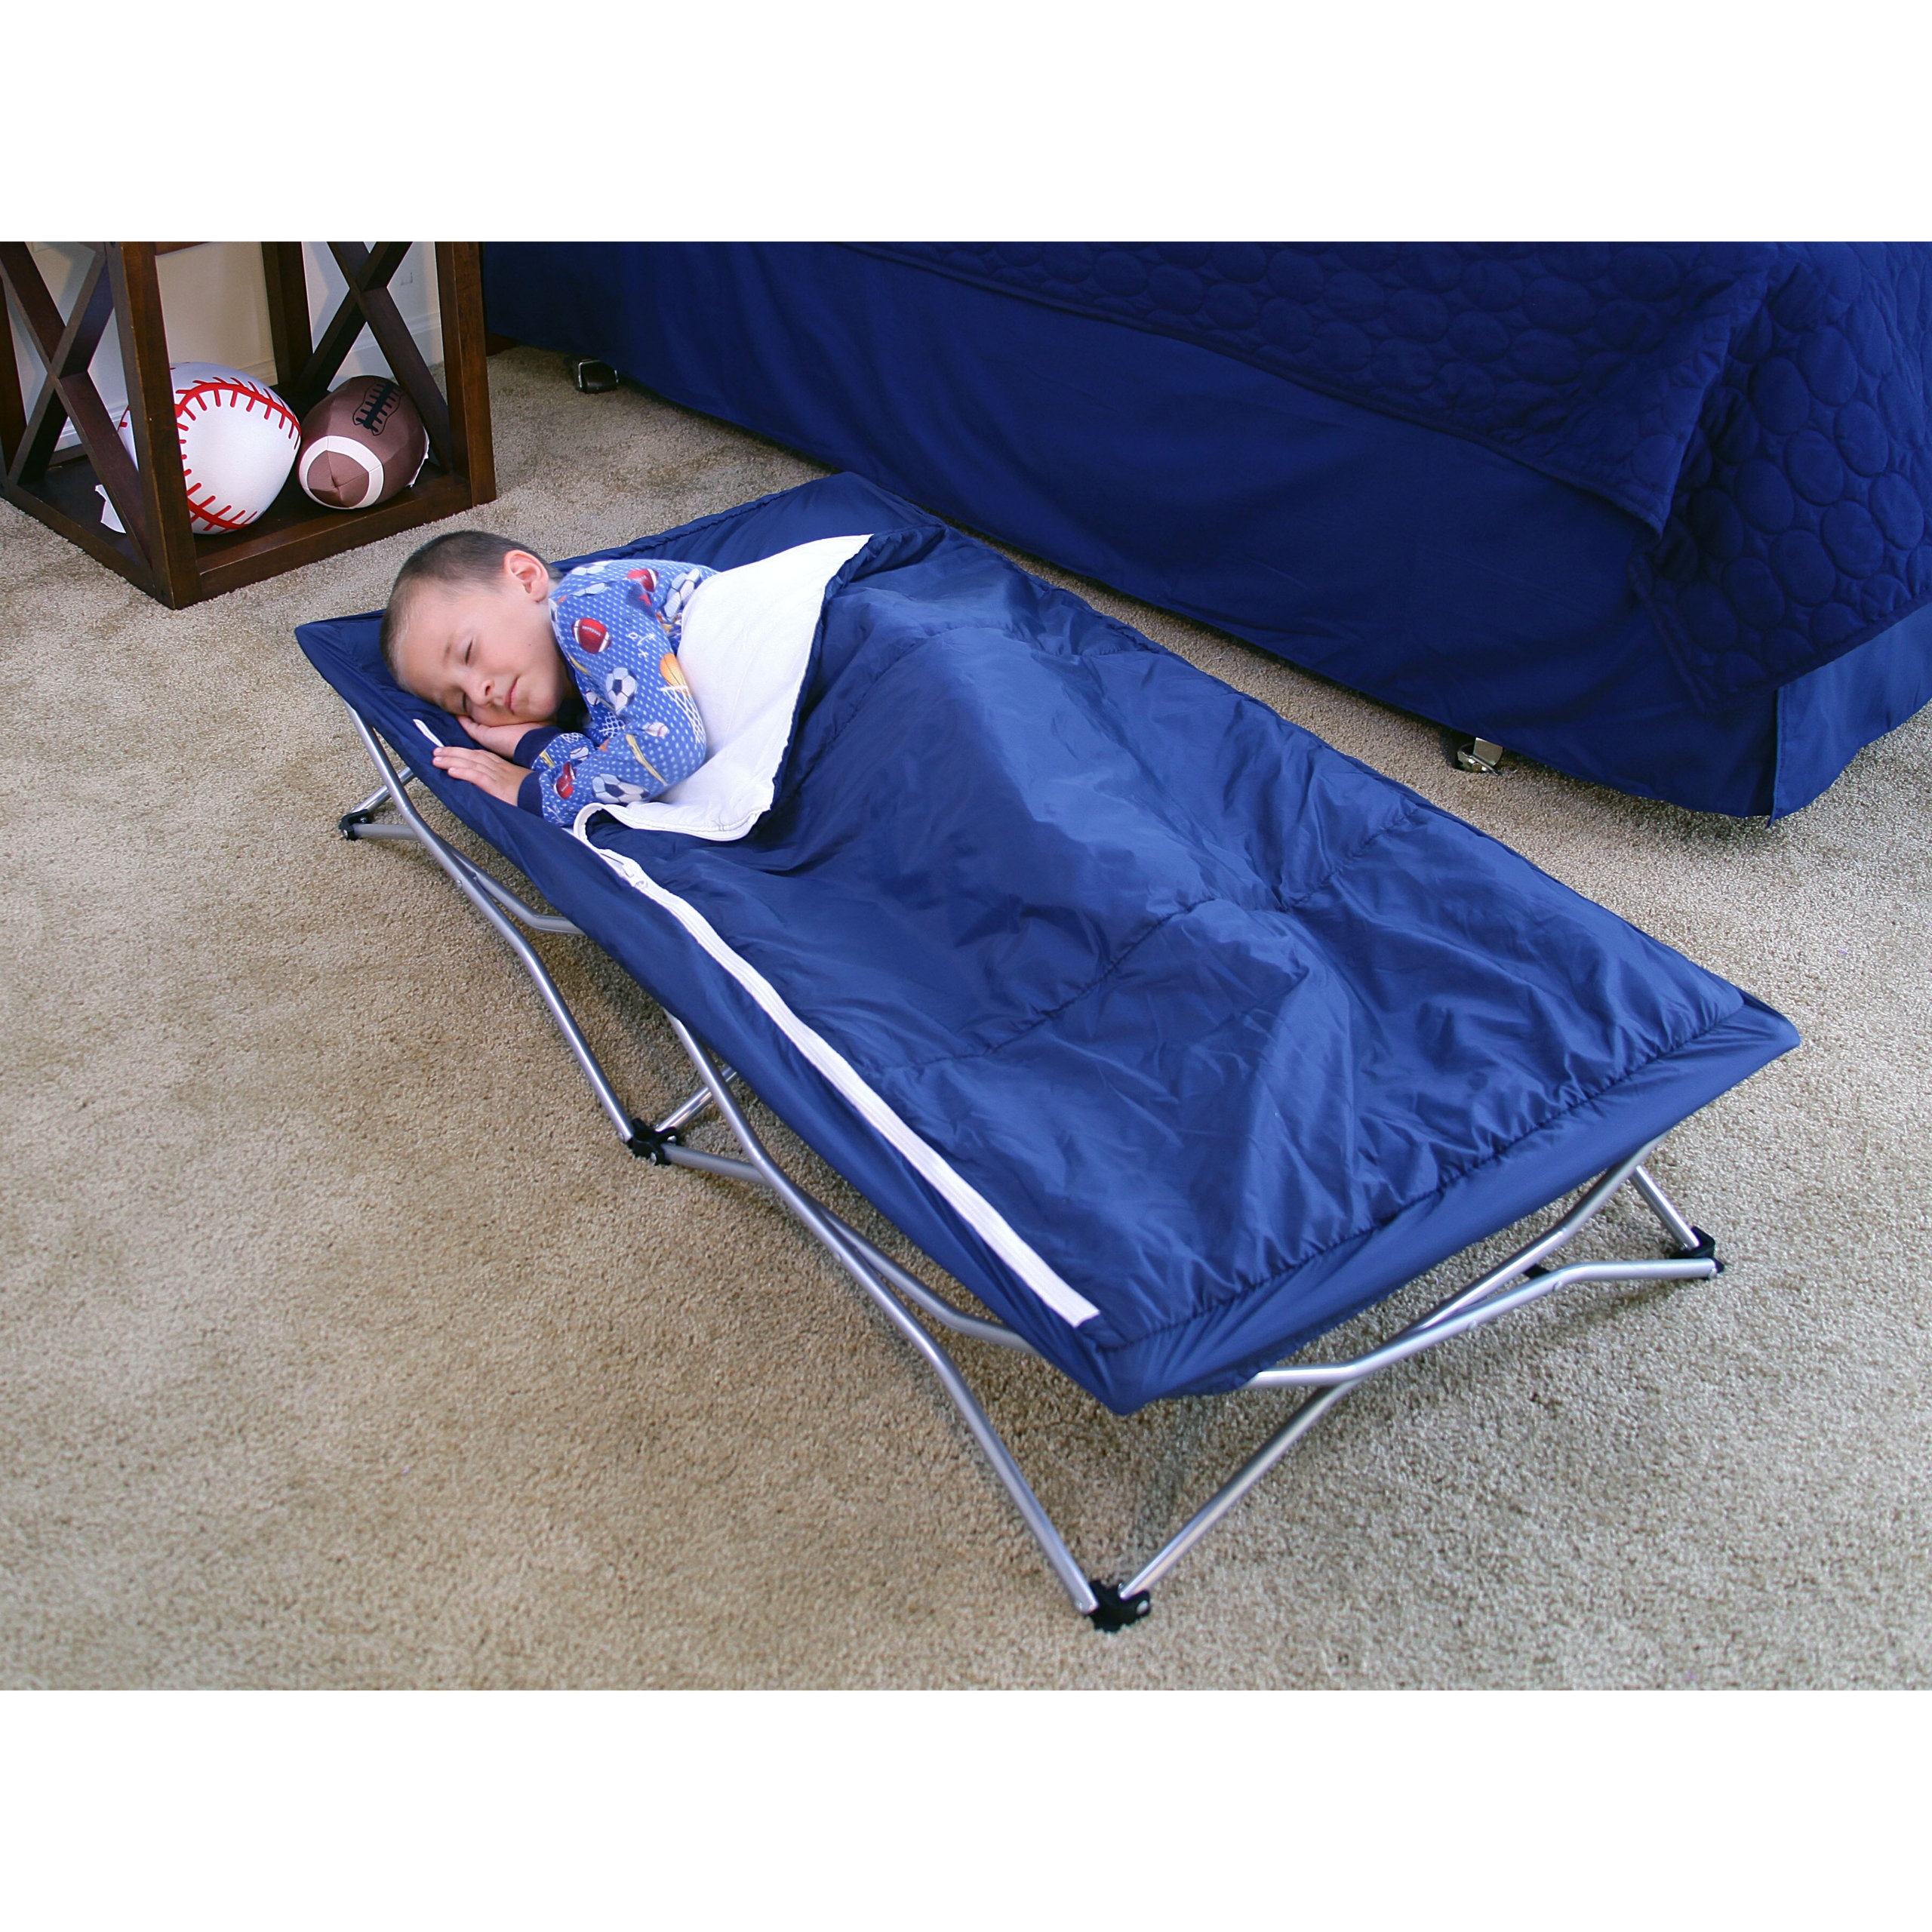 My Cot with Deluxe Sleeping Bag